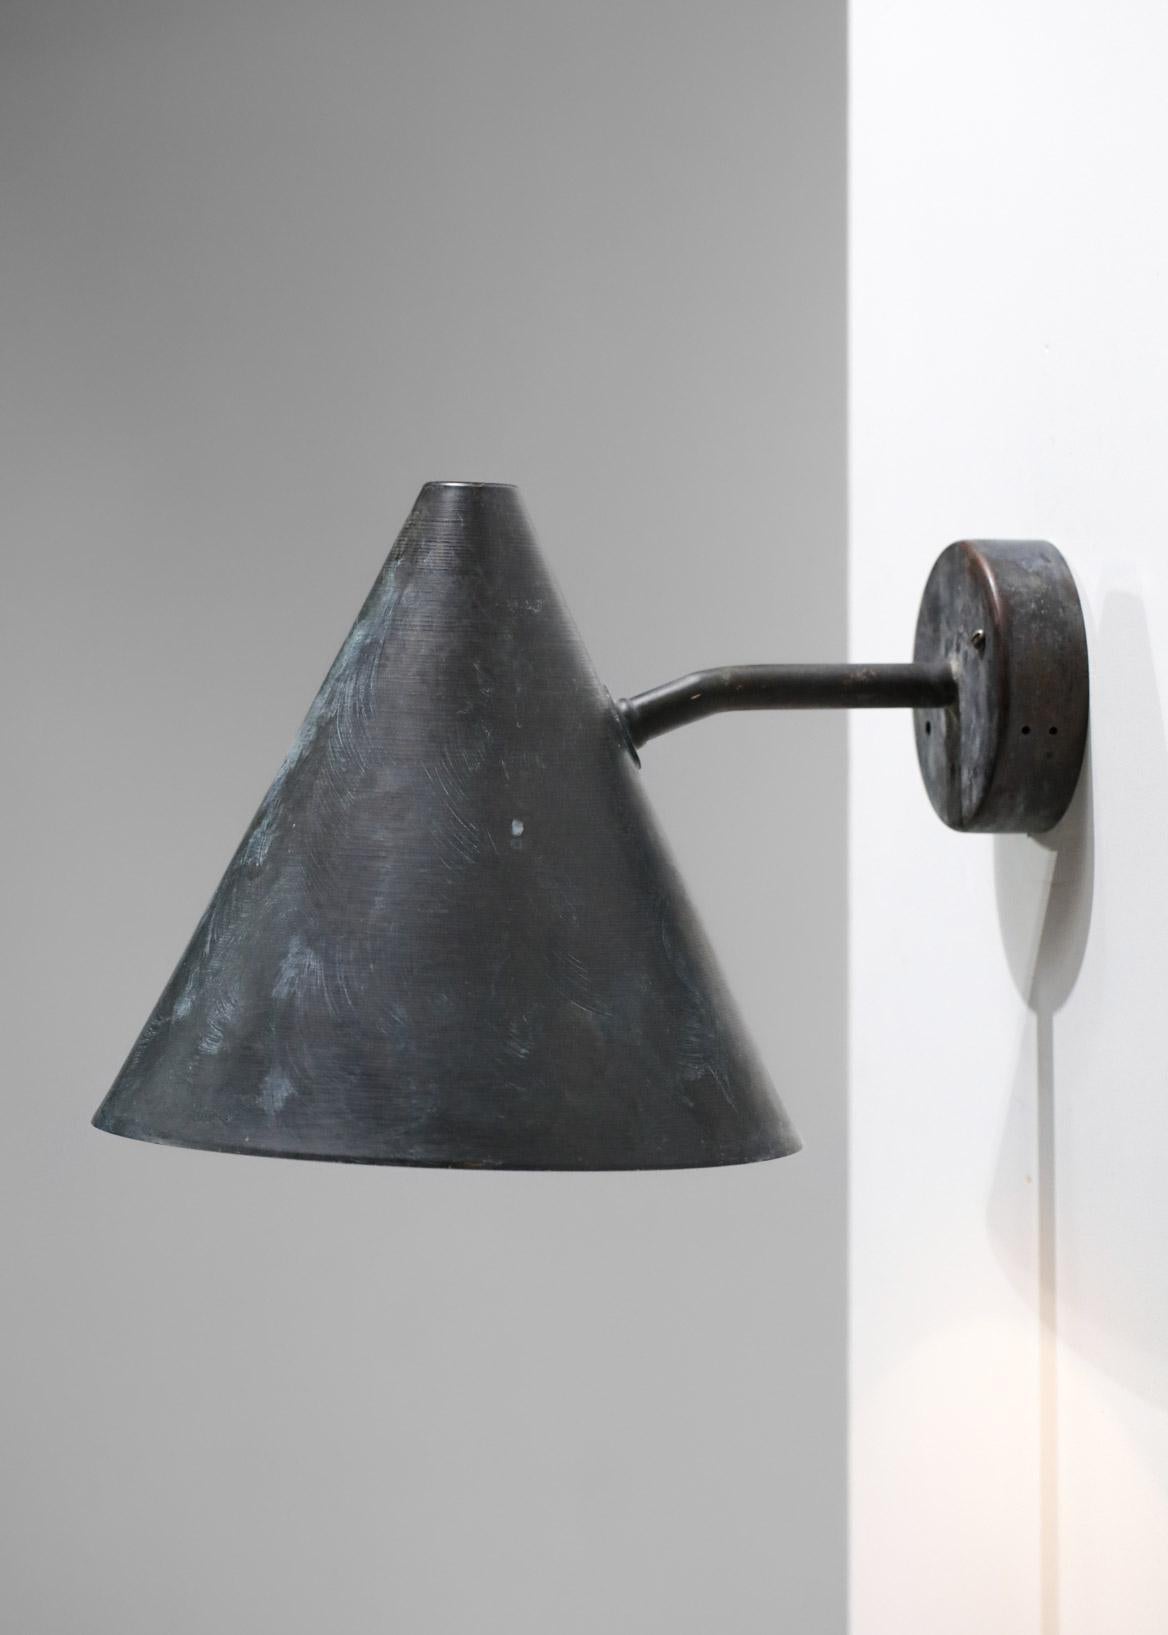 Lacquered Large Wall Lamp Hans Agne Jakobsson Tratten Patina Years 60, F590 For Sale